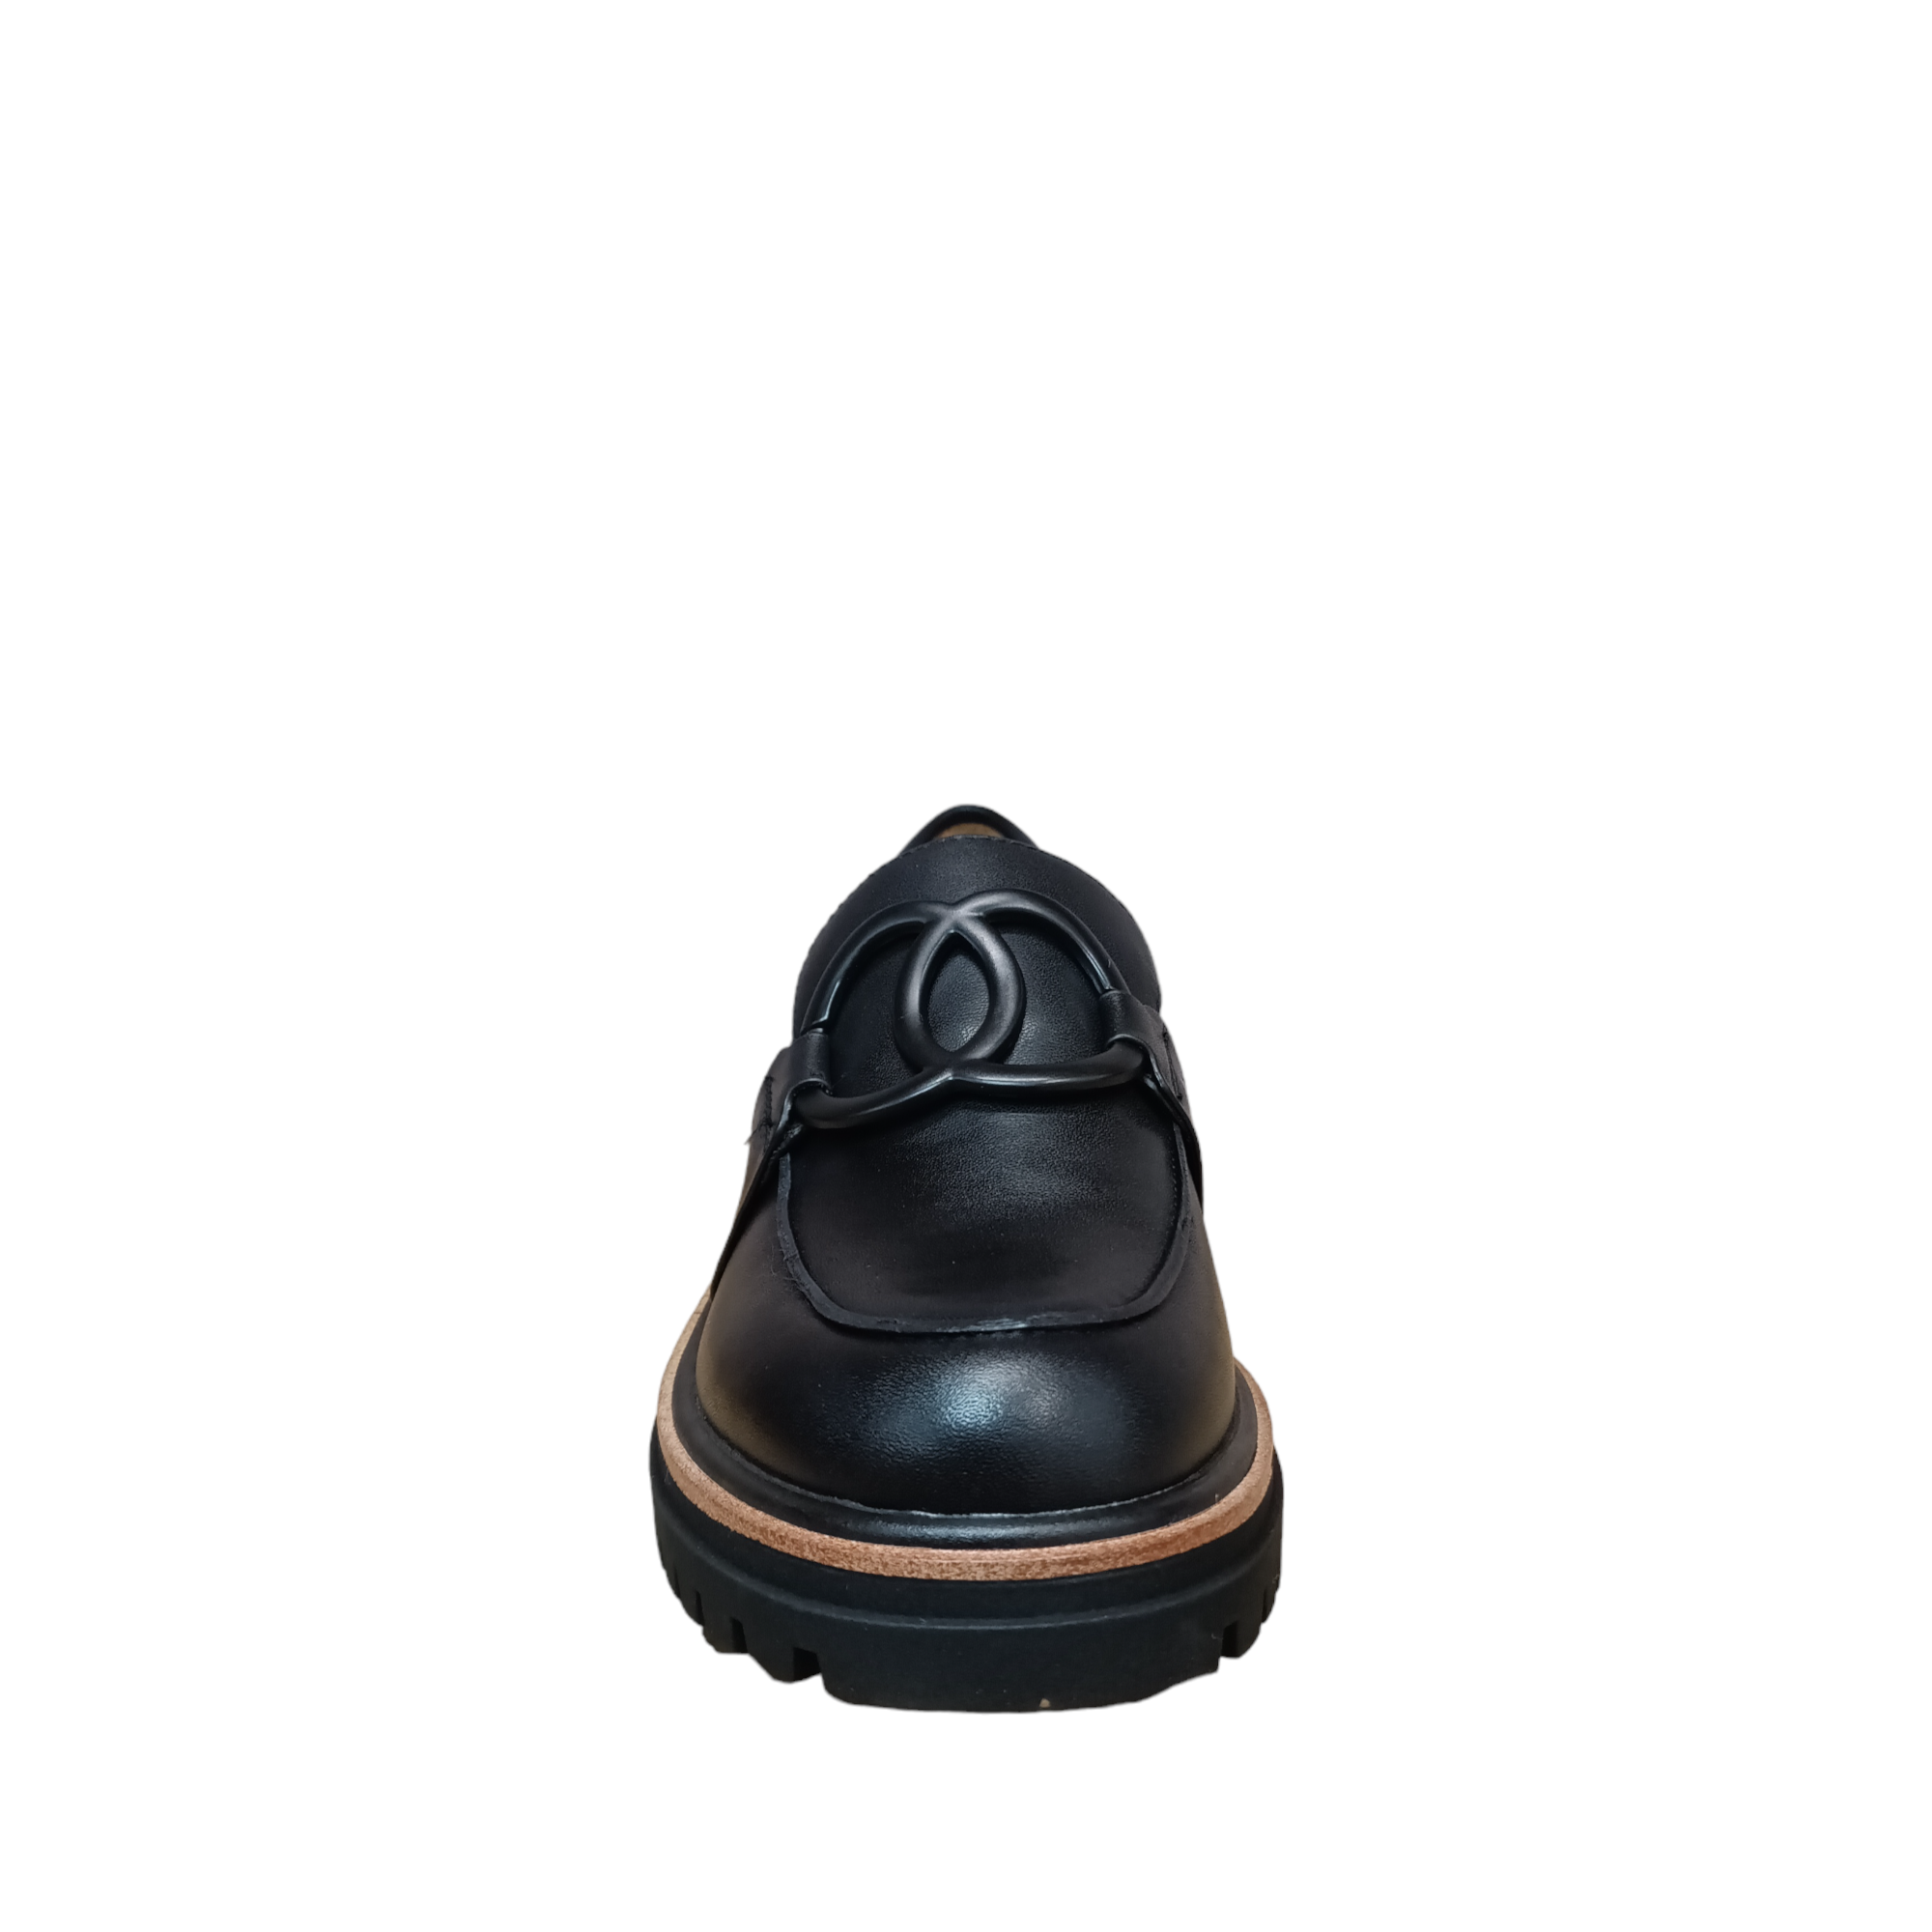 Shop Abra EOS - with shoe&me - from EOS - Shoes - Shoe, Winter, Womens - [collection]